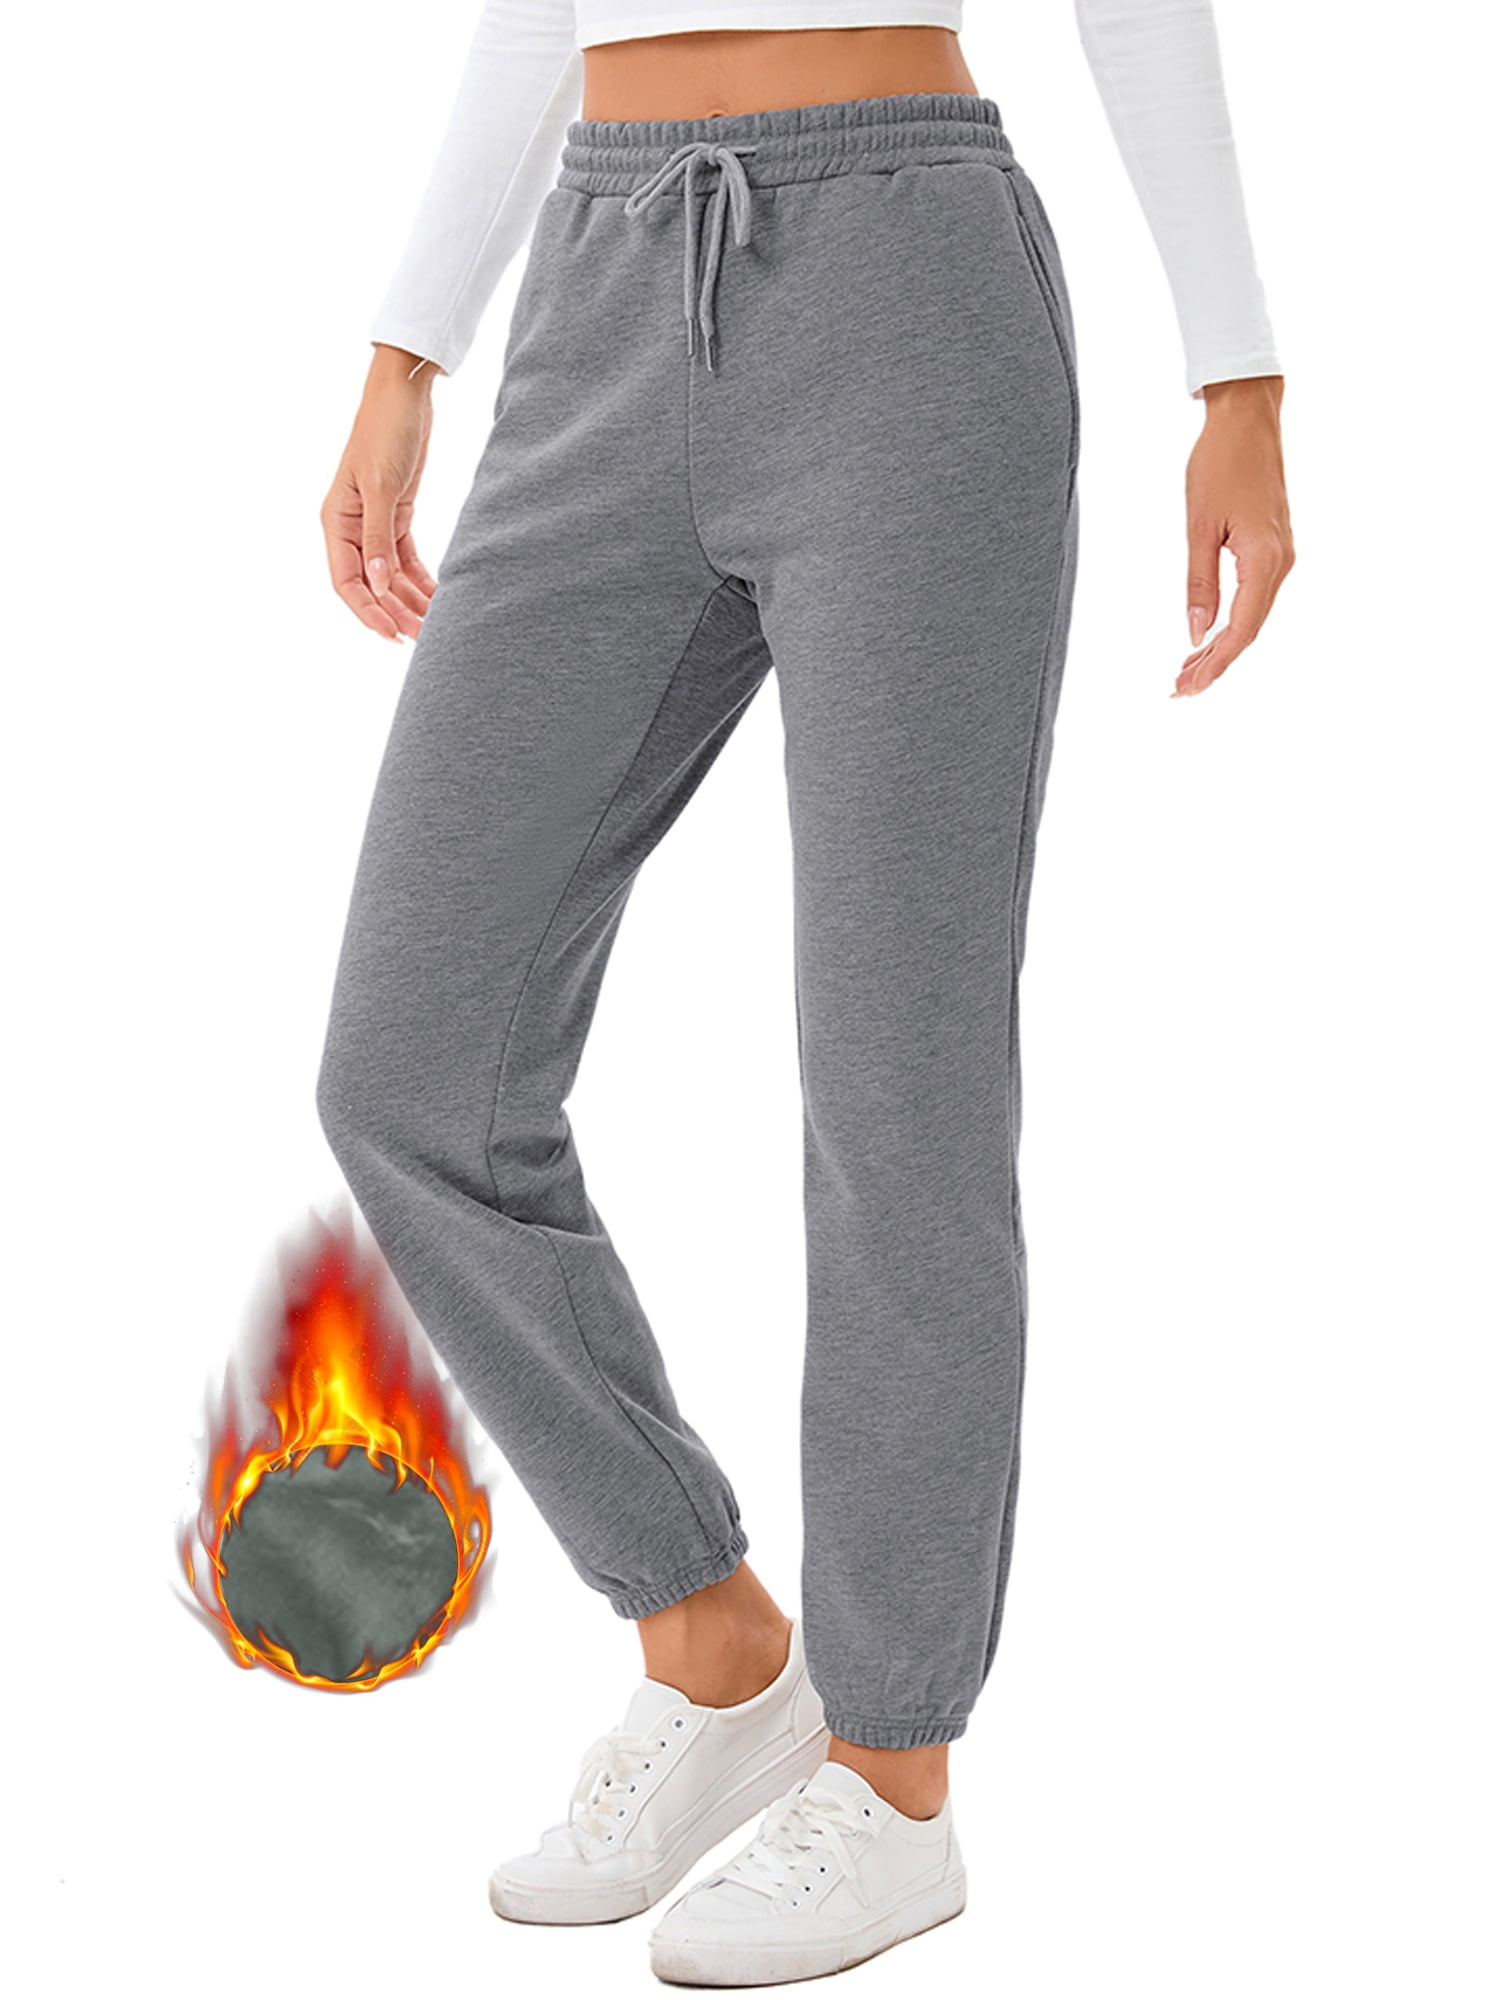 Winter Wear Warm Fleece Track Pants For Women- Coral Red (m To 5xl) at Rs  899.00 | Winter Wear | ID: 2852809176888